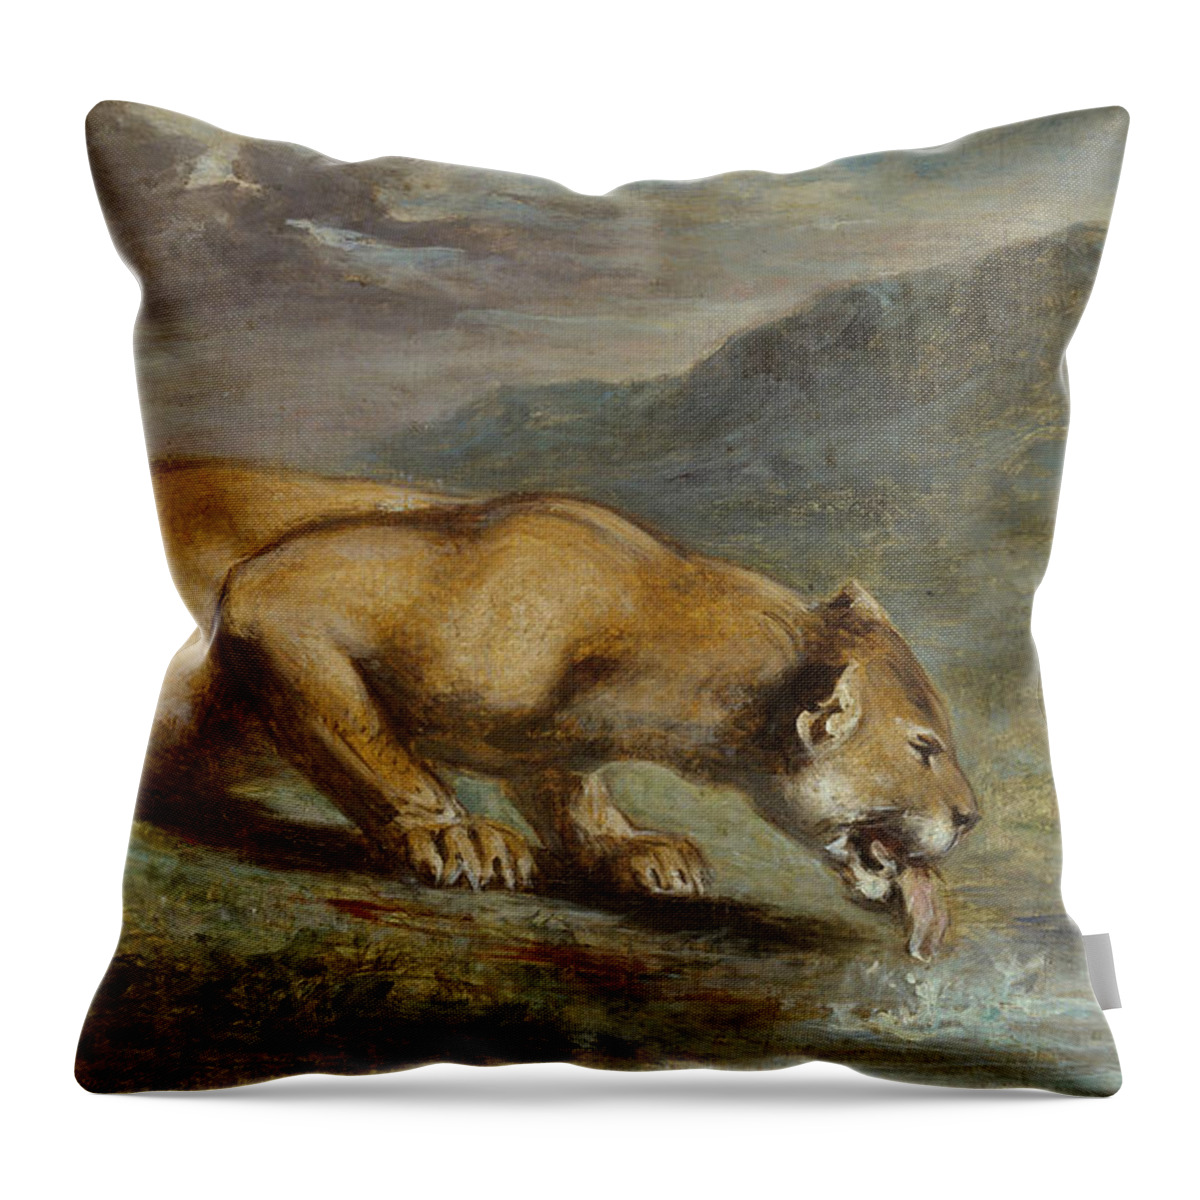 19th Century Art Throw Pillow featuring the painting Wounded Lioness by Pierre Andrieu